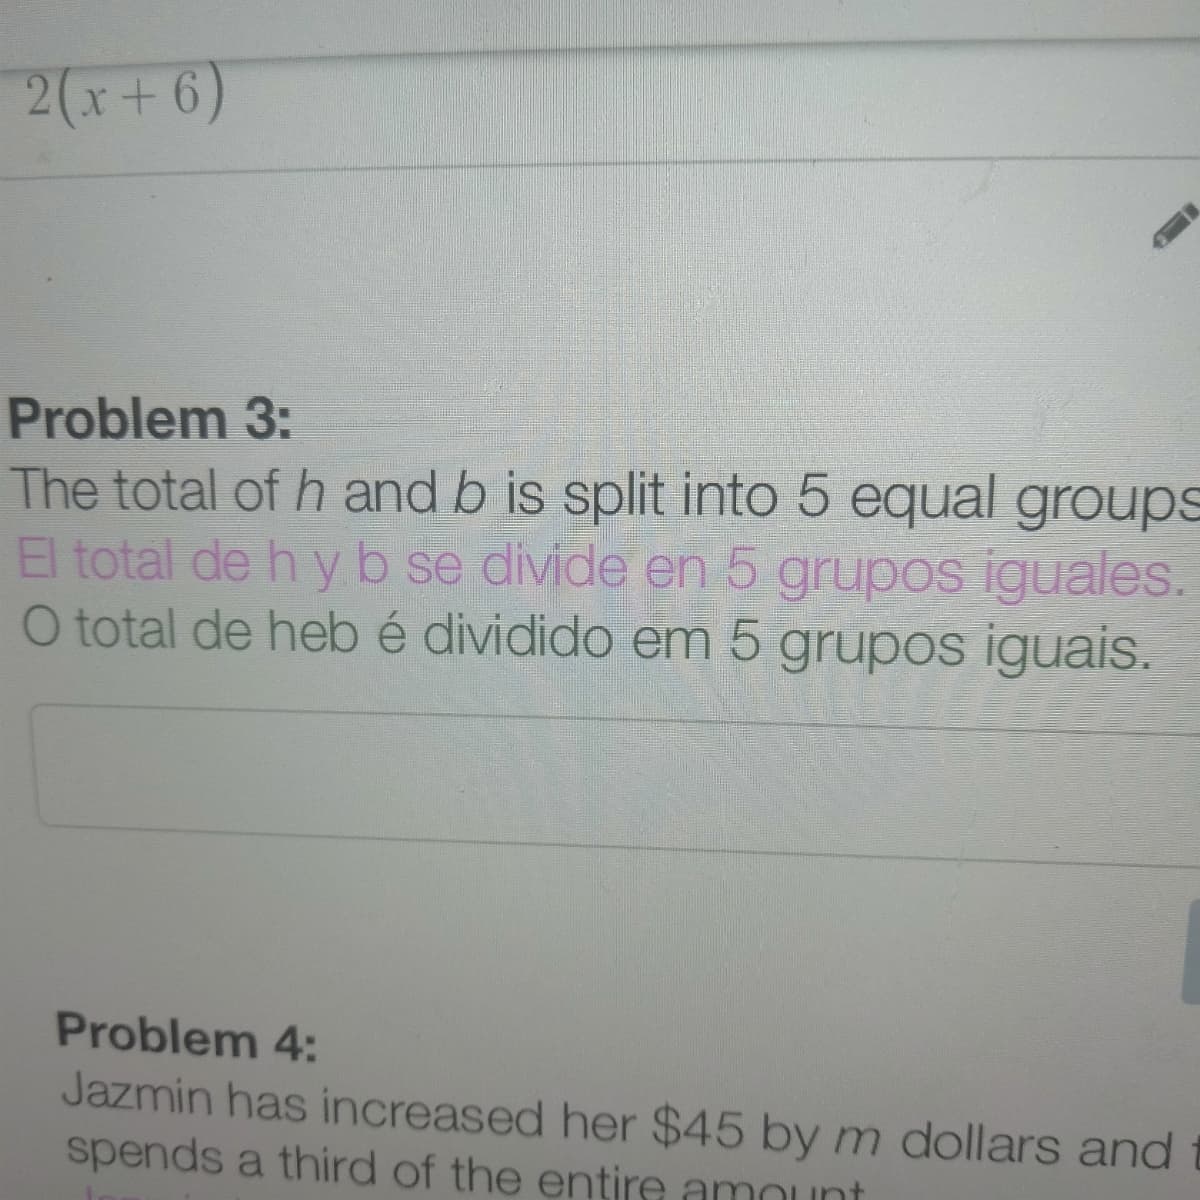 2(x+6)
Problem 3:
The total of h and b is split into 5 equal groups
El total de h yb se divide en 5 grupos iguales.
O total de hebé dividido em 5 grupos iguais.
Problem 4:
Jazmin has increased her $45 by m dollars and
spends a third of the entire amount
